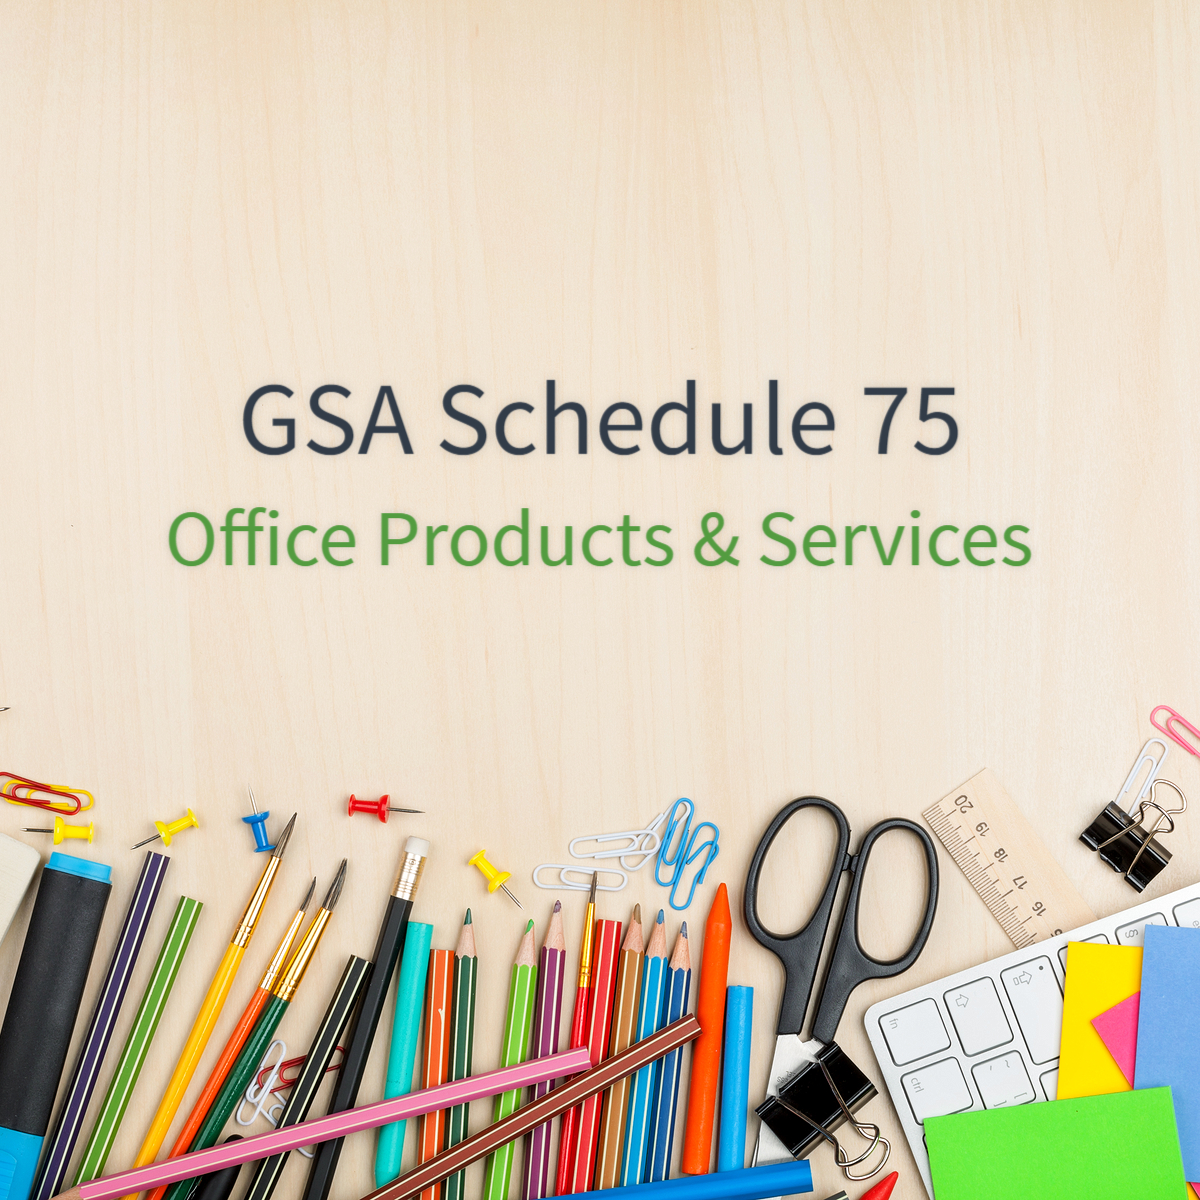 gsa-office-products-services-schedule-75-contract